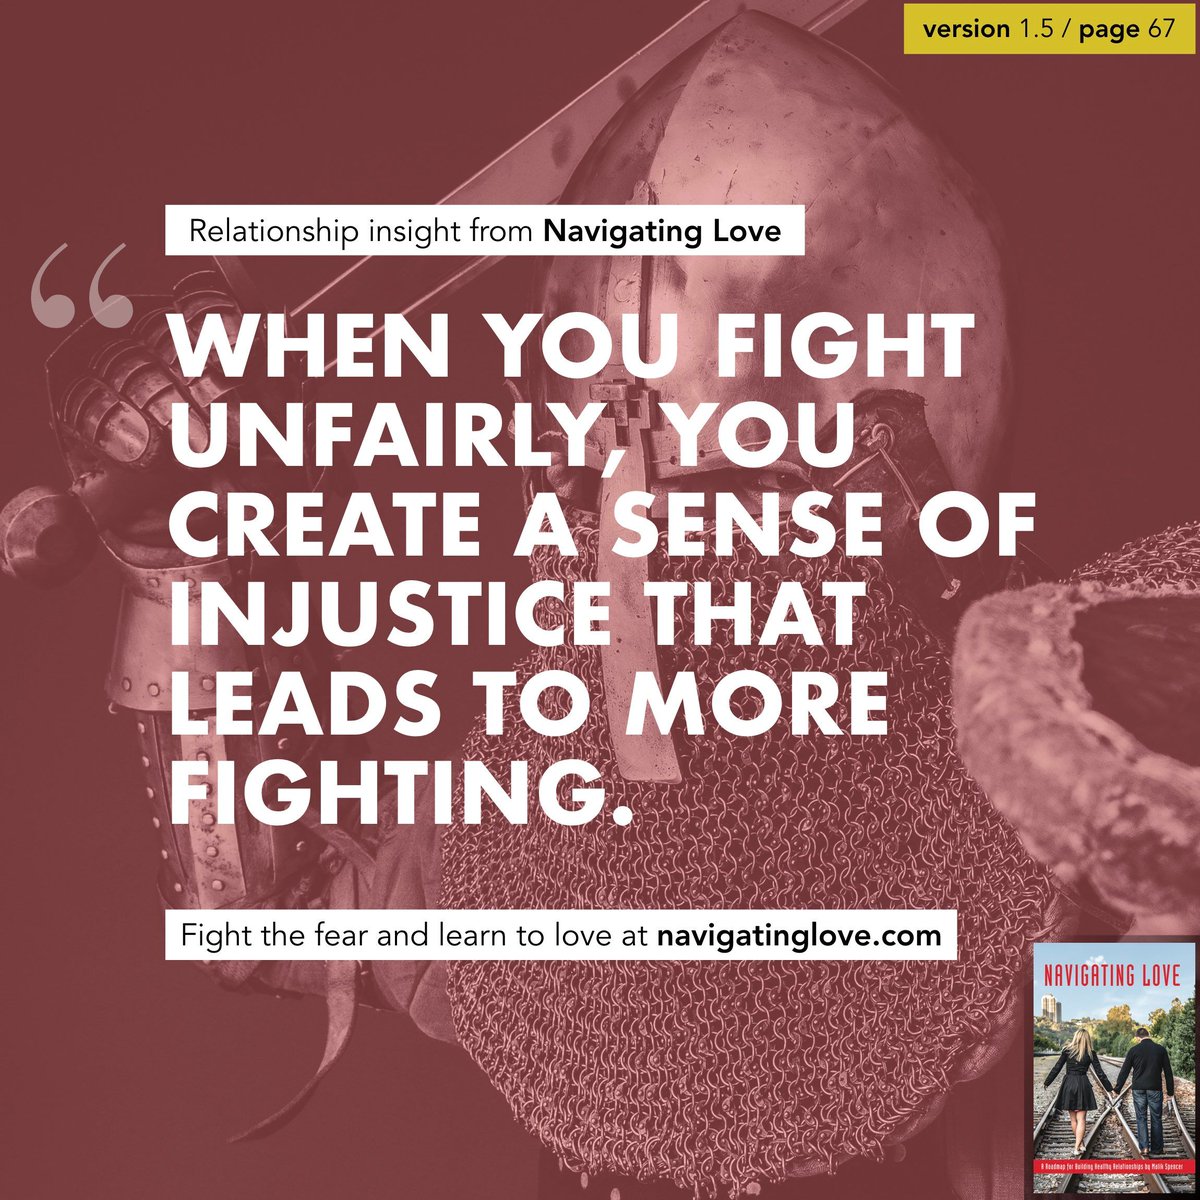 When you fight unfairly, you create a sense of injustice that leads to more fighting. (p.67)